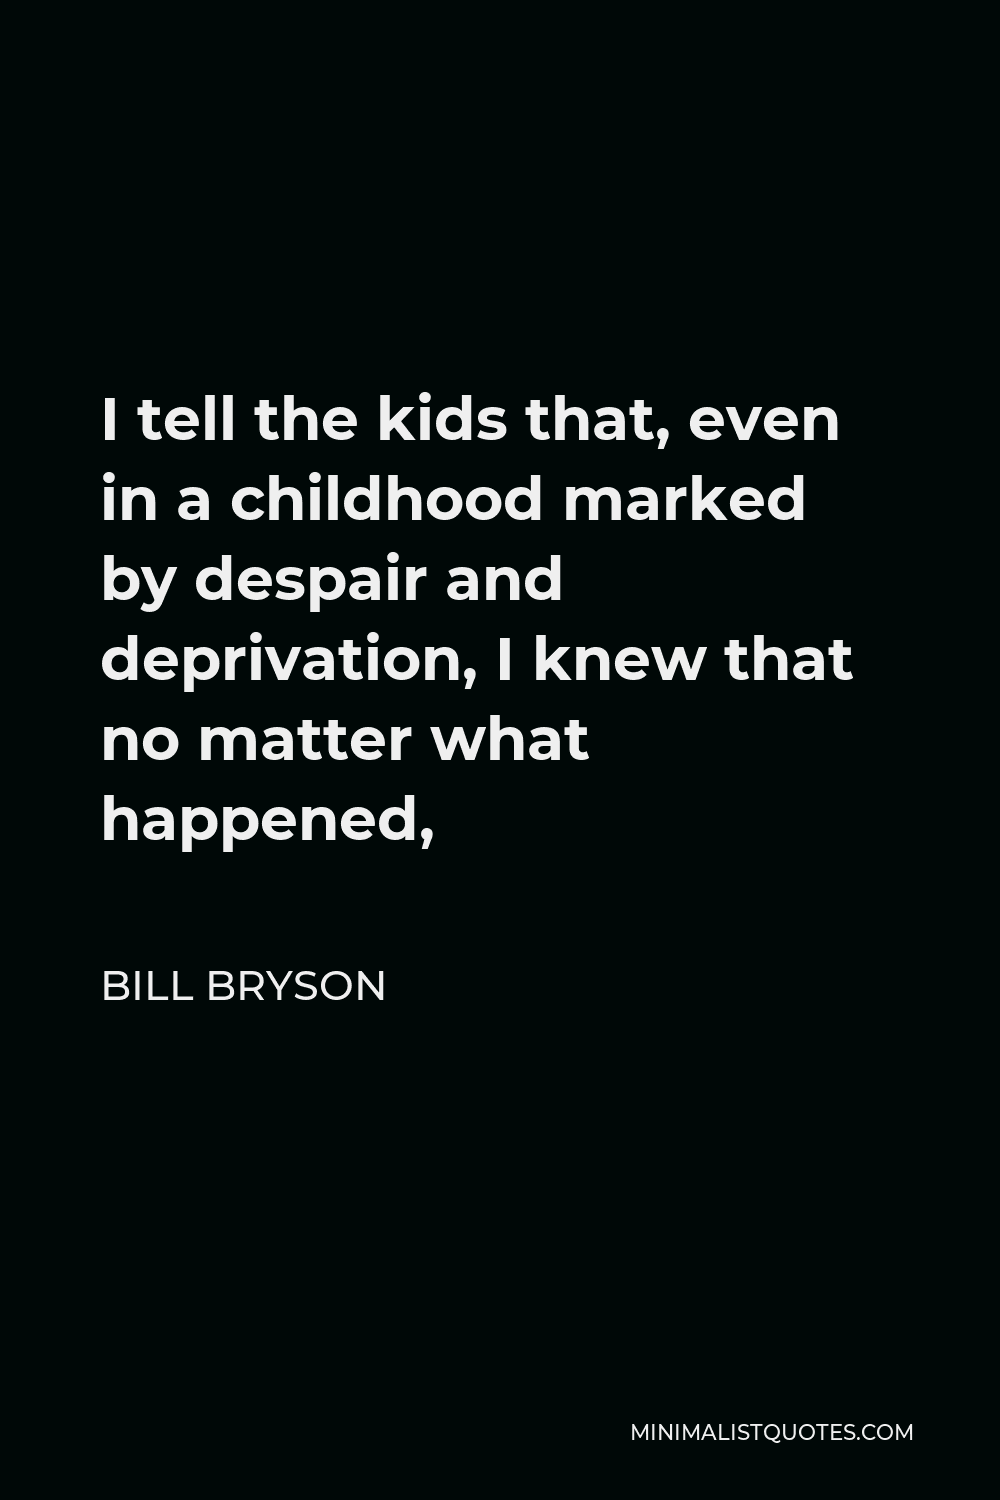 Bill Bryson Quote - I tell the kids that, even in a childhood marked by despair and deprivation, I knew that no matter what happened,